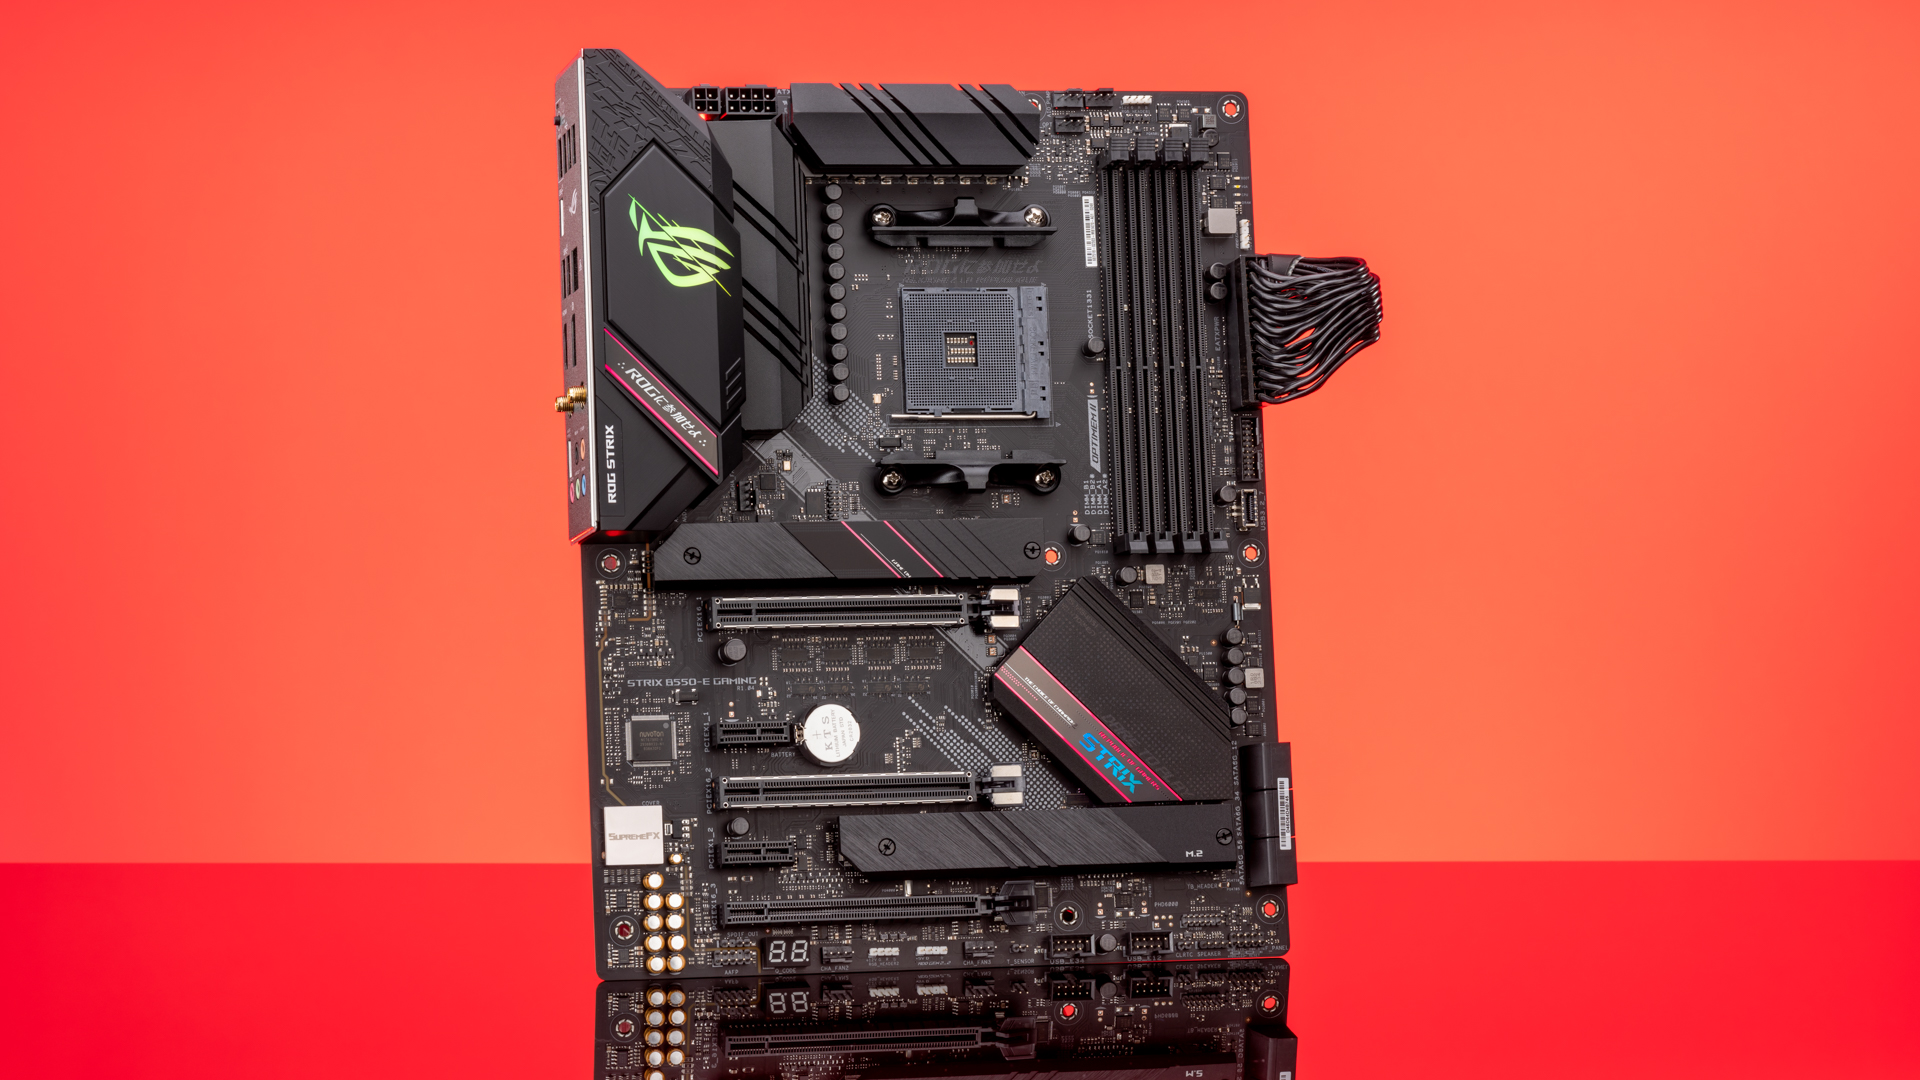 The ASUS ROG Strix B550-E Gaming motherboard offers top-tier features